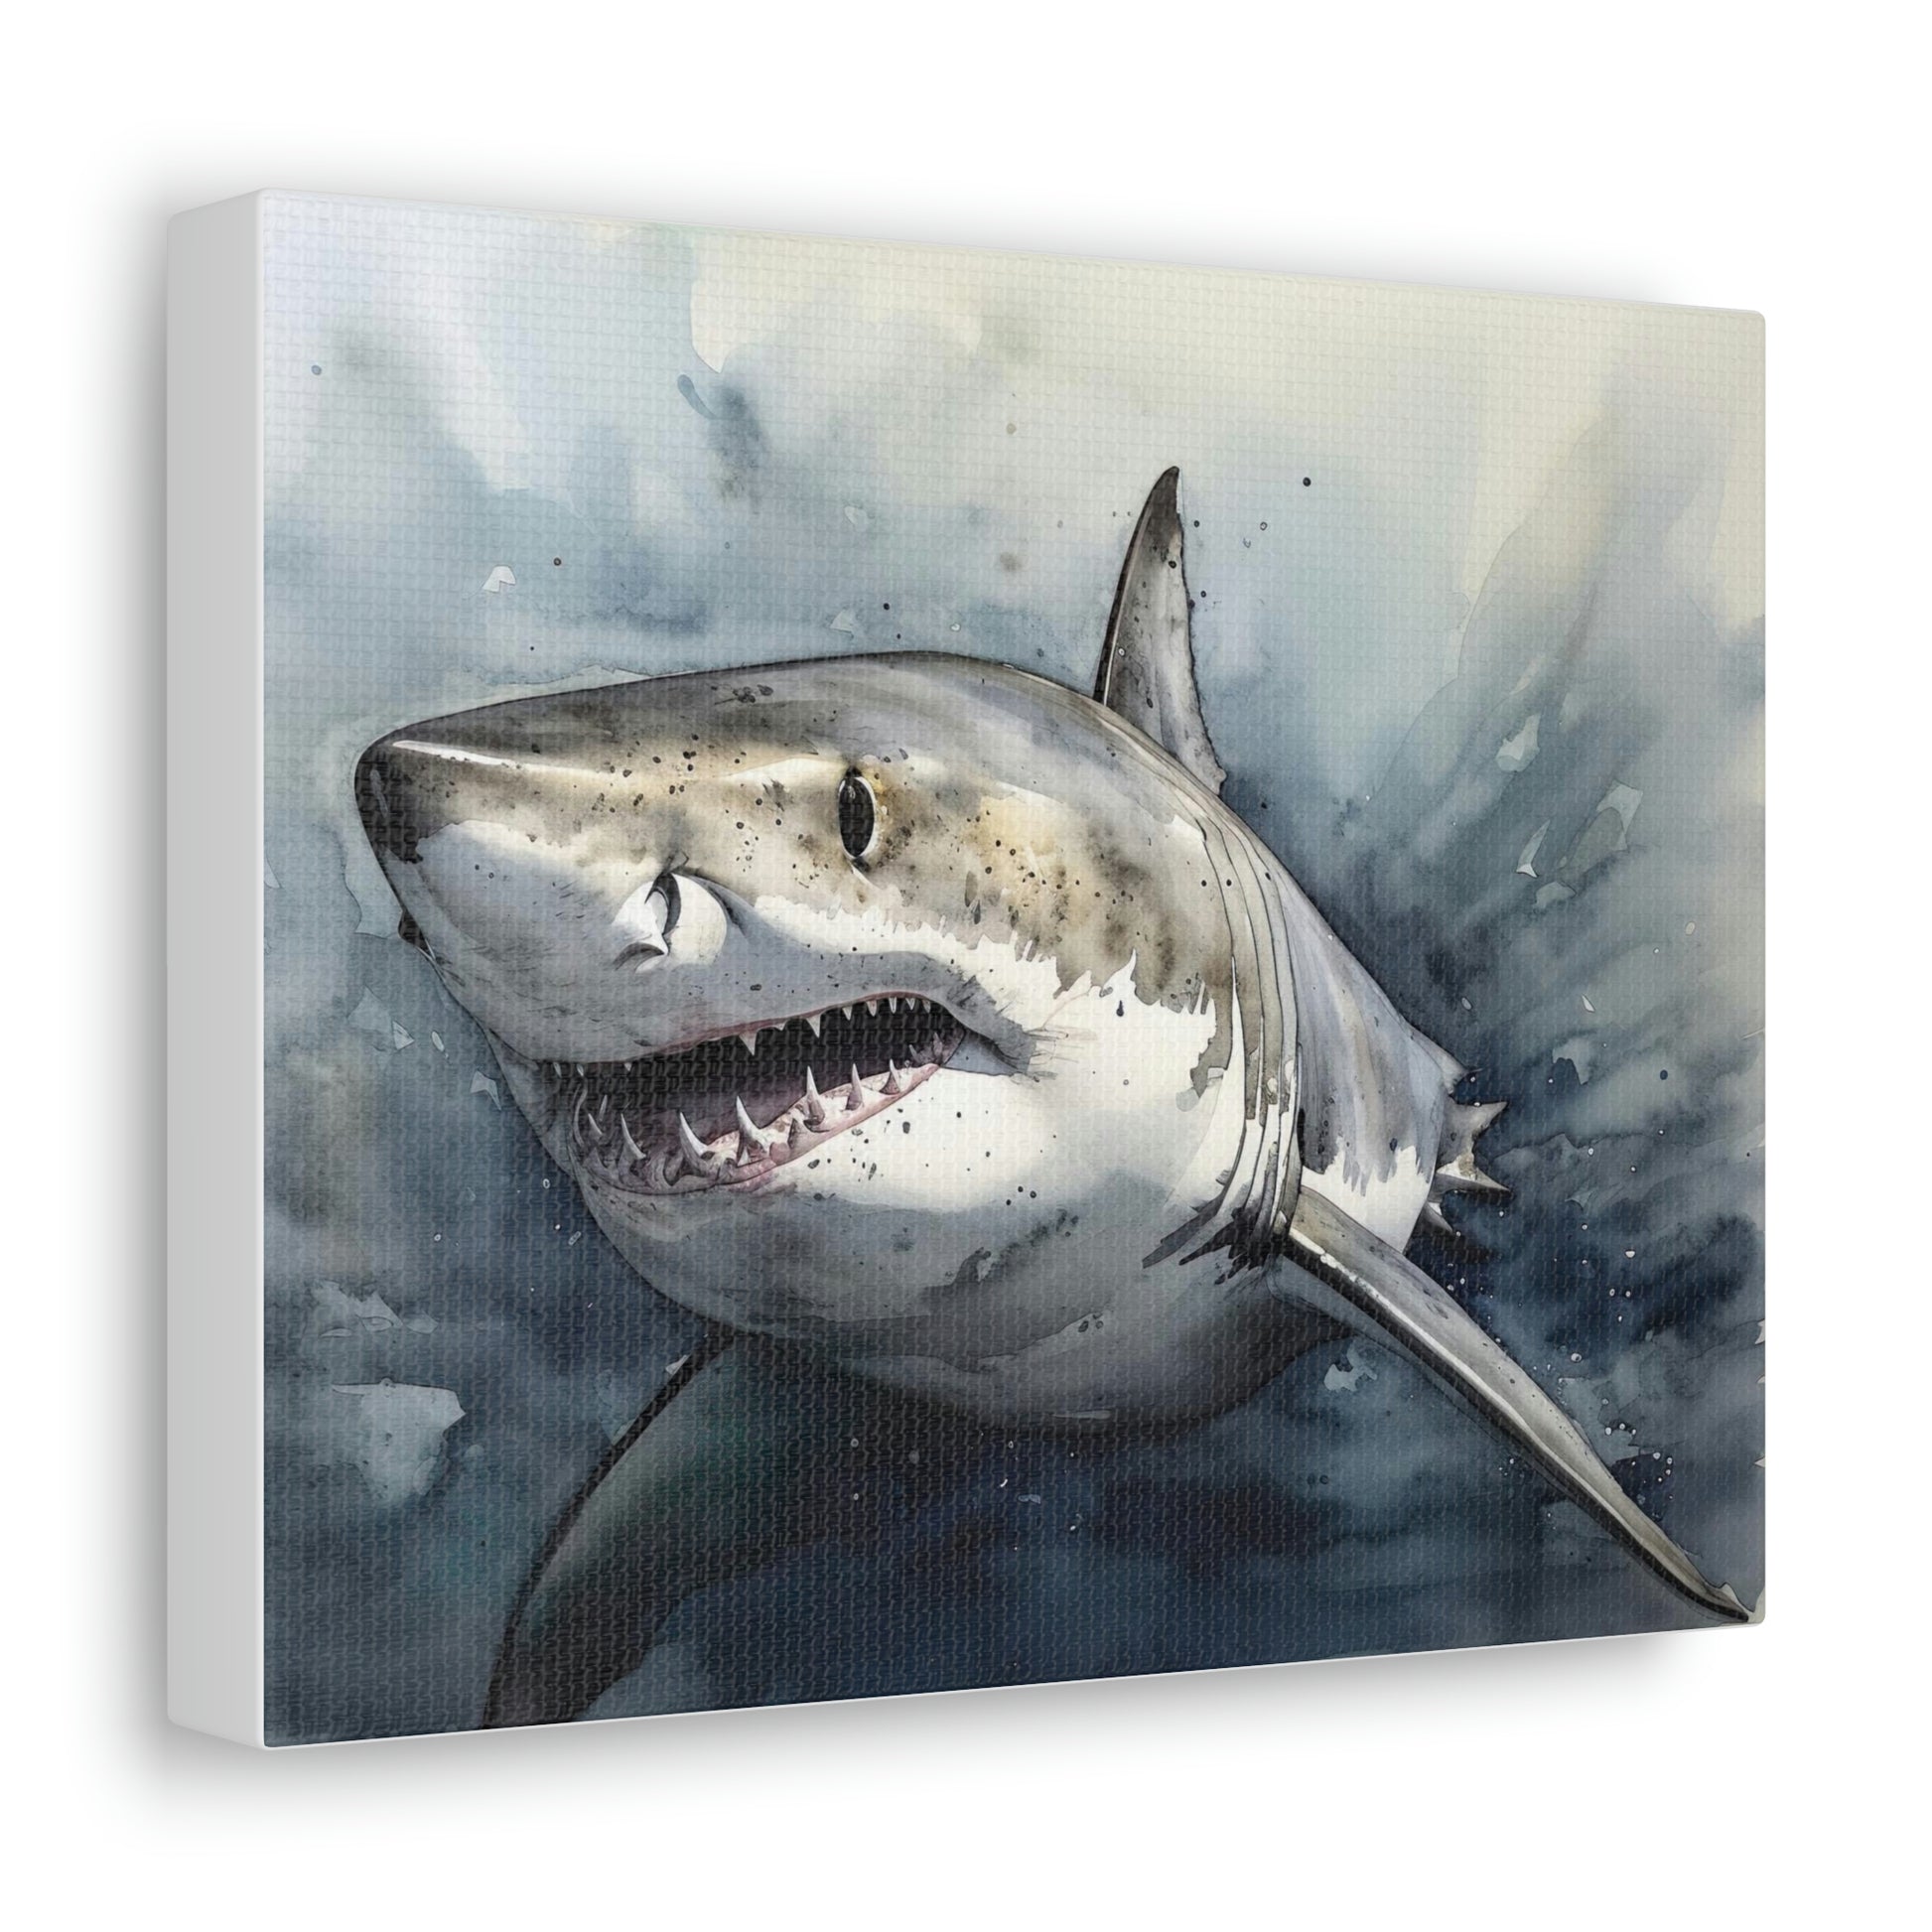 Gray Predator of the Deep: Great White Shark Canvas Print for Ocean Enthusiasts